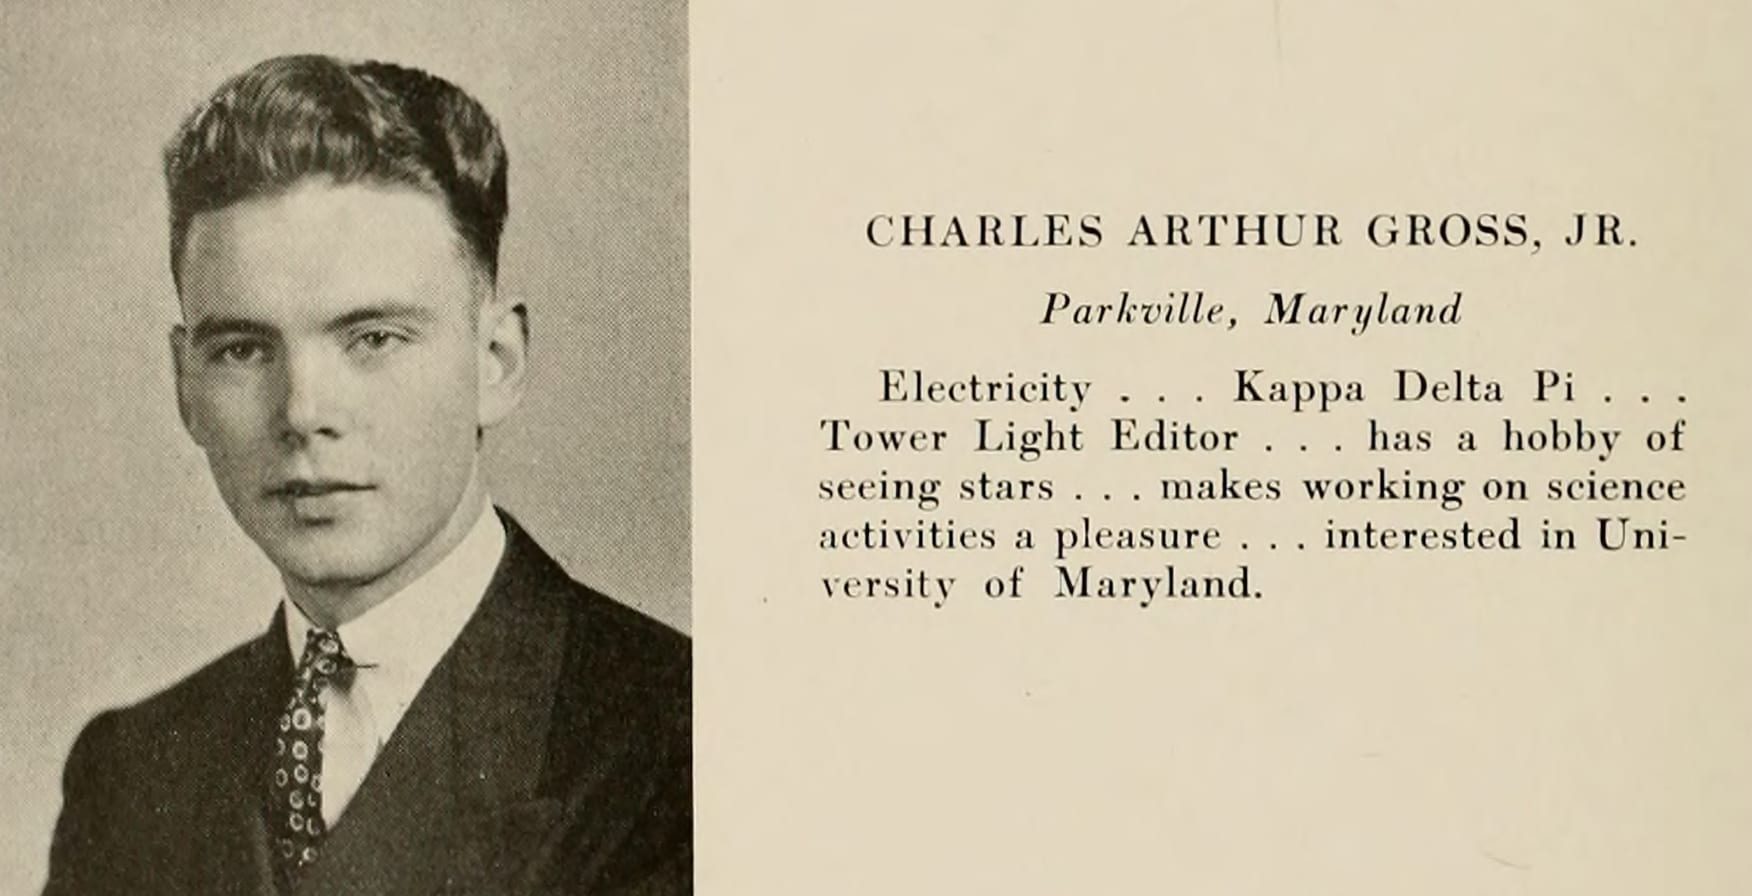 Senior photo of Gross. His bio reads: Charles Arthur Gross, Jr. Parkville, Maryland. Electricity . . . Kappa Delta Pi . . . Tower Light Editor . . . has a hobby of seeing stars . . . makes working on science activities a pleasure . . . interested in University of Maryland.